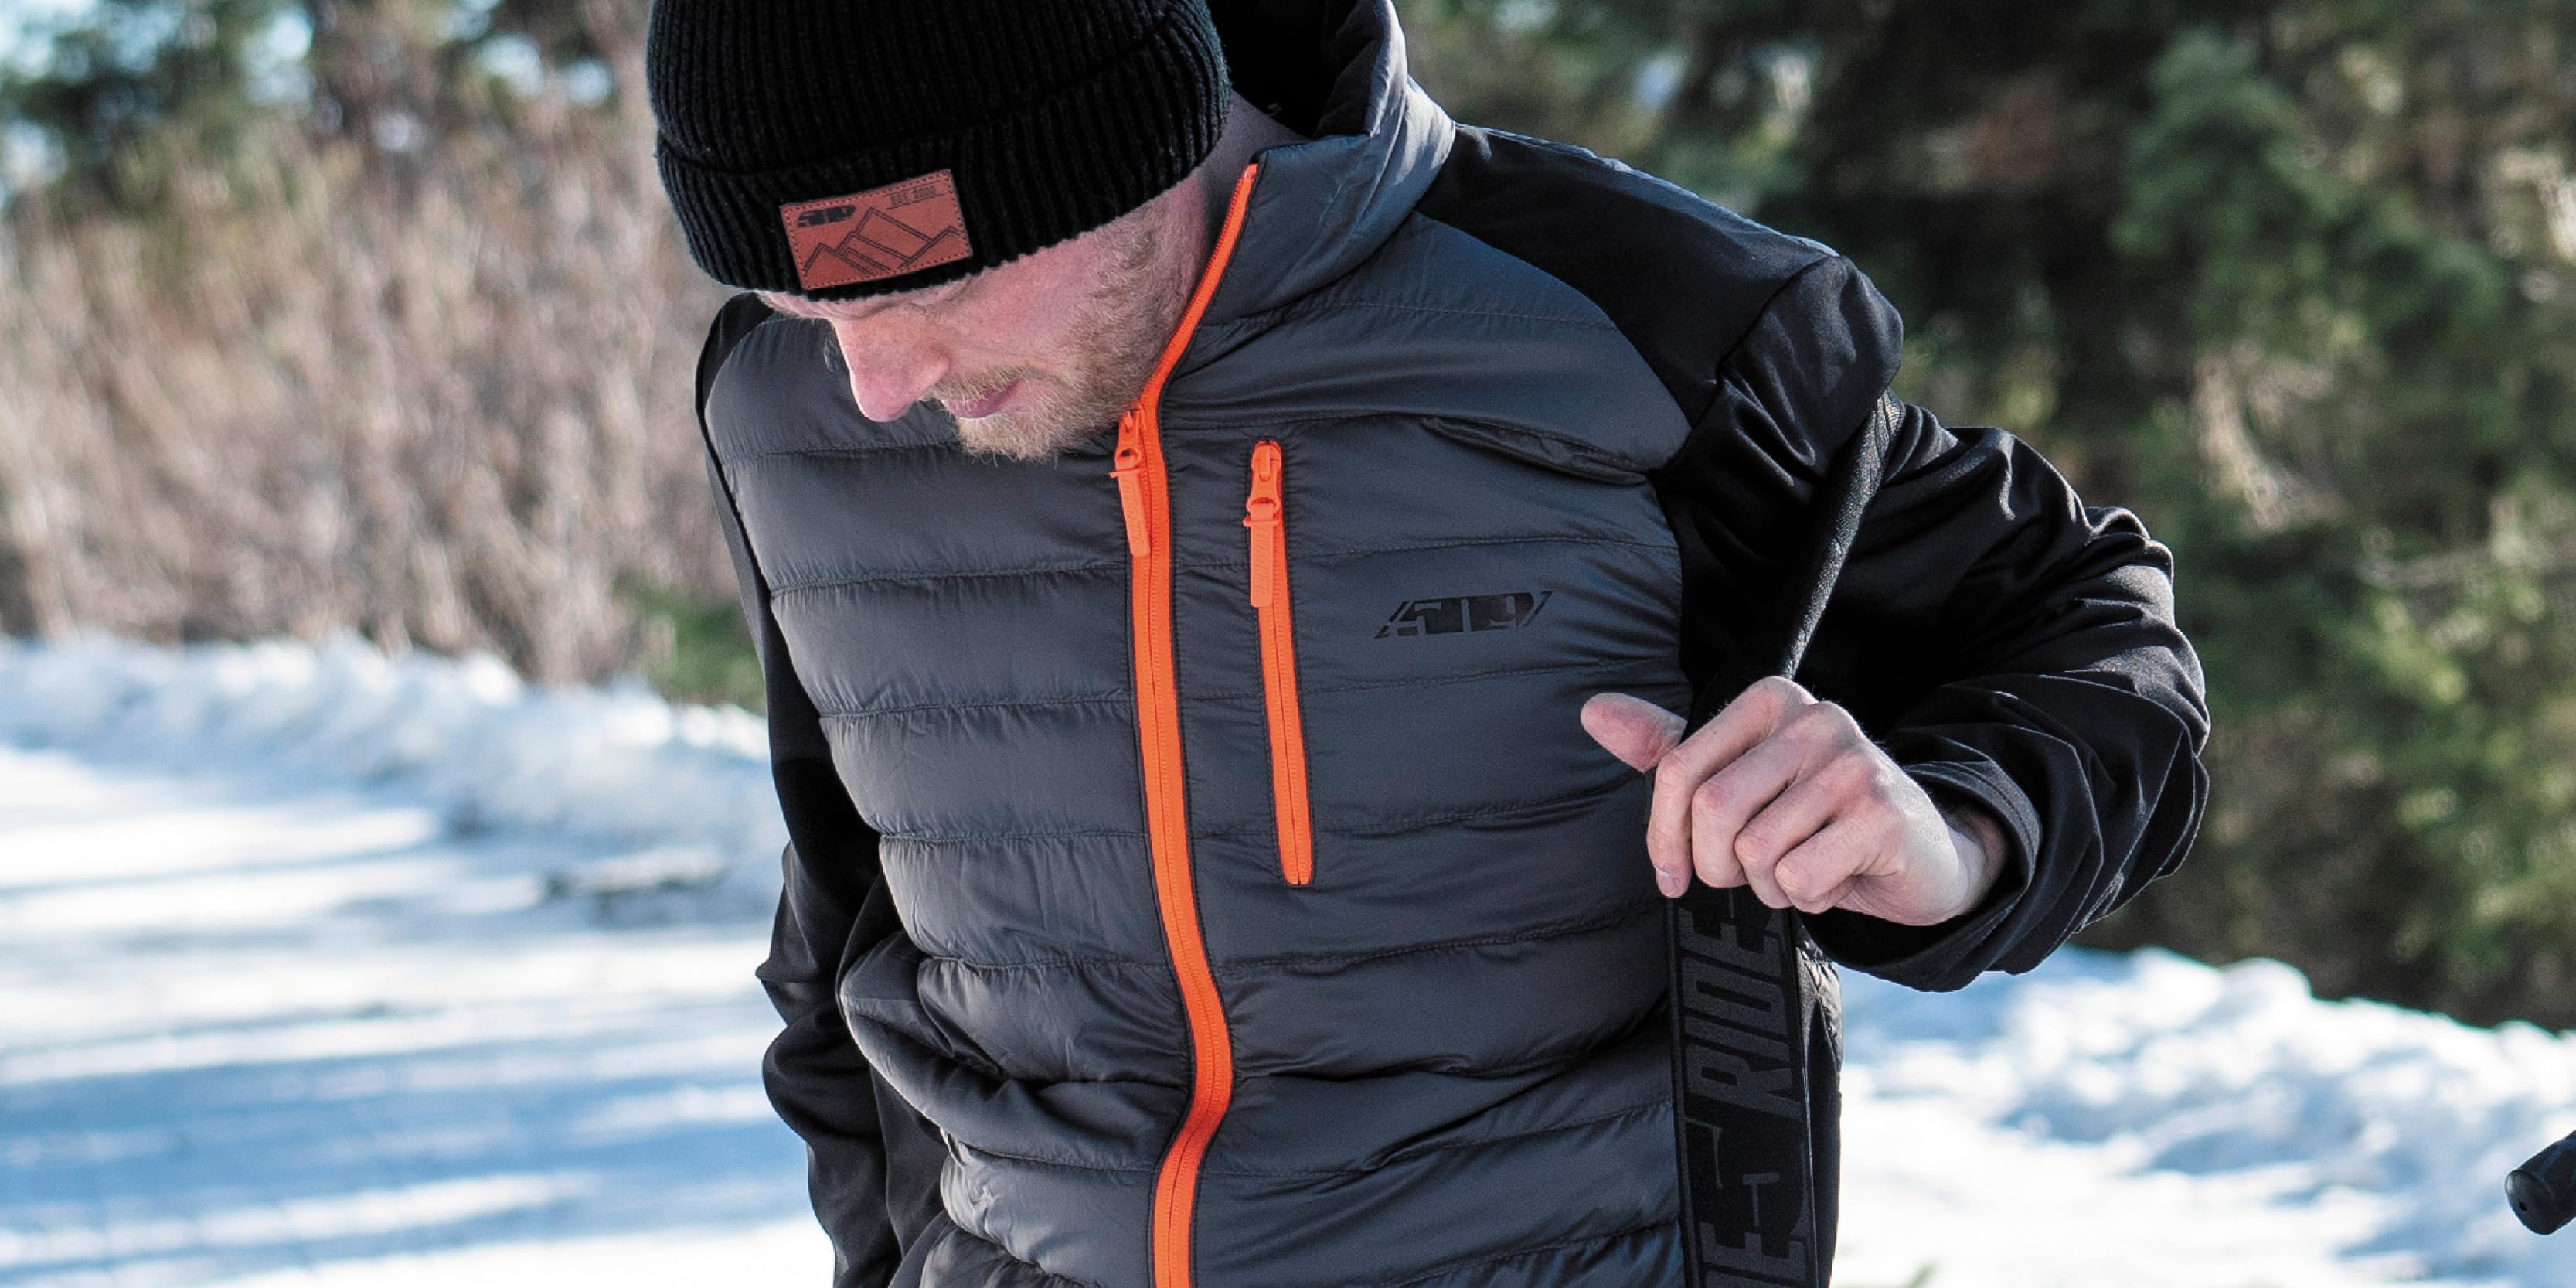 Temper Insulated Jacket – 509